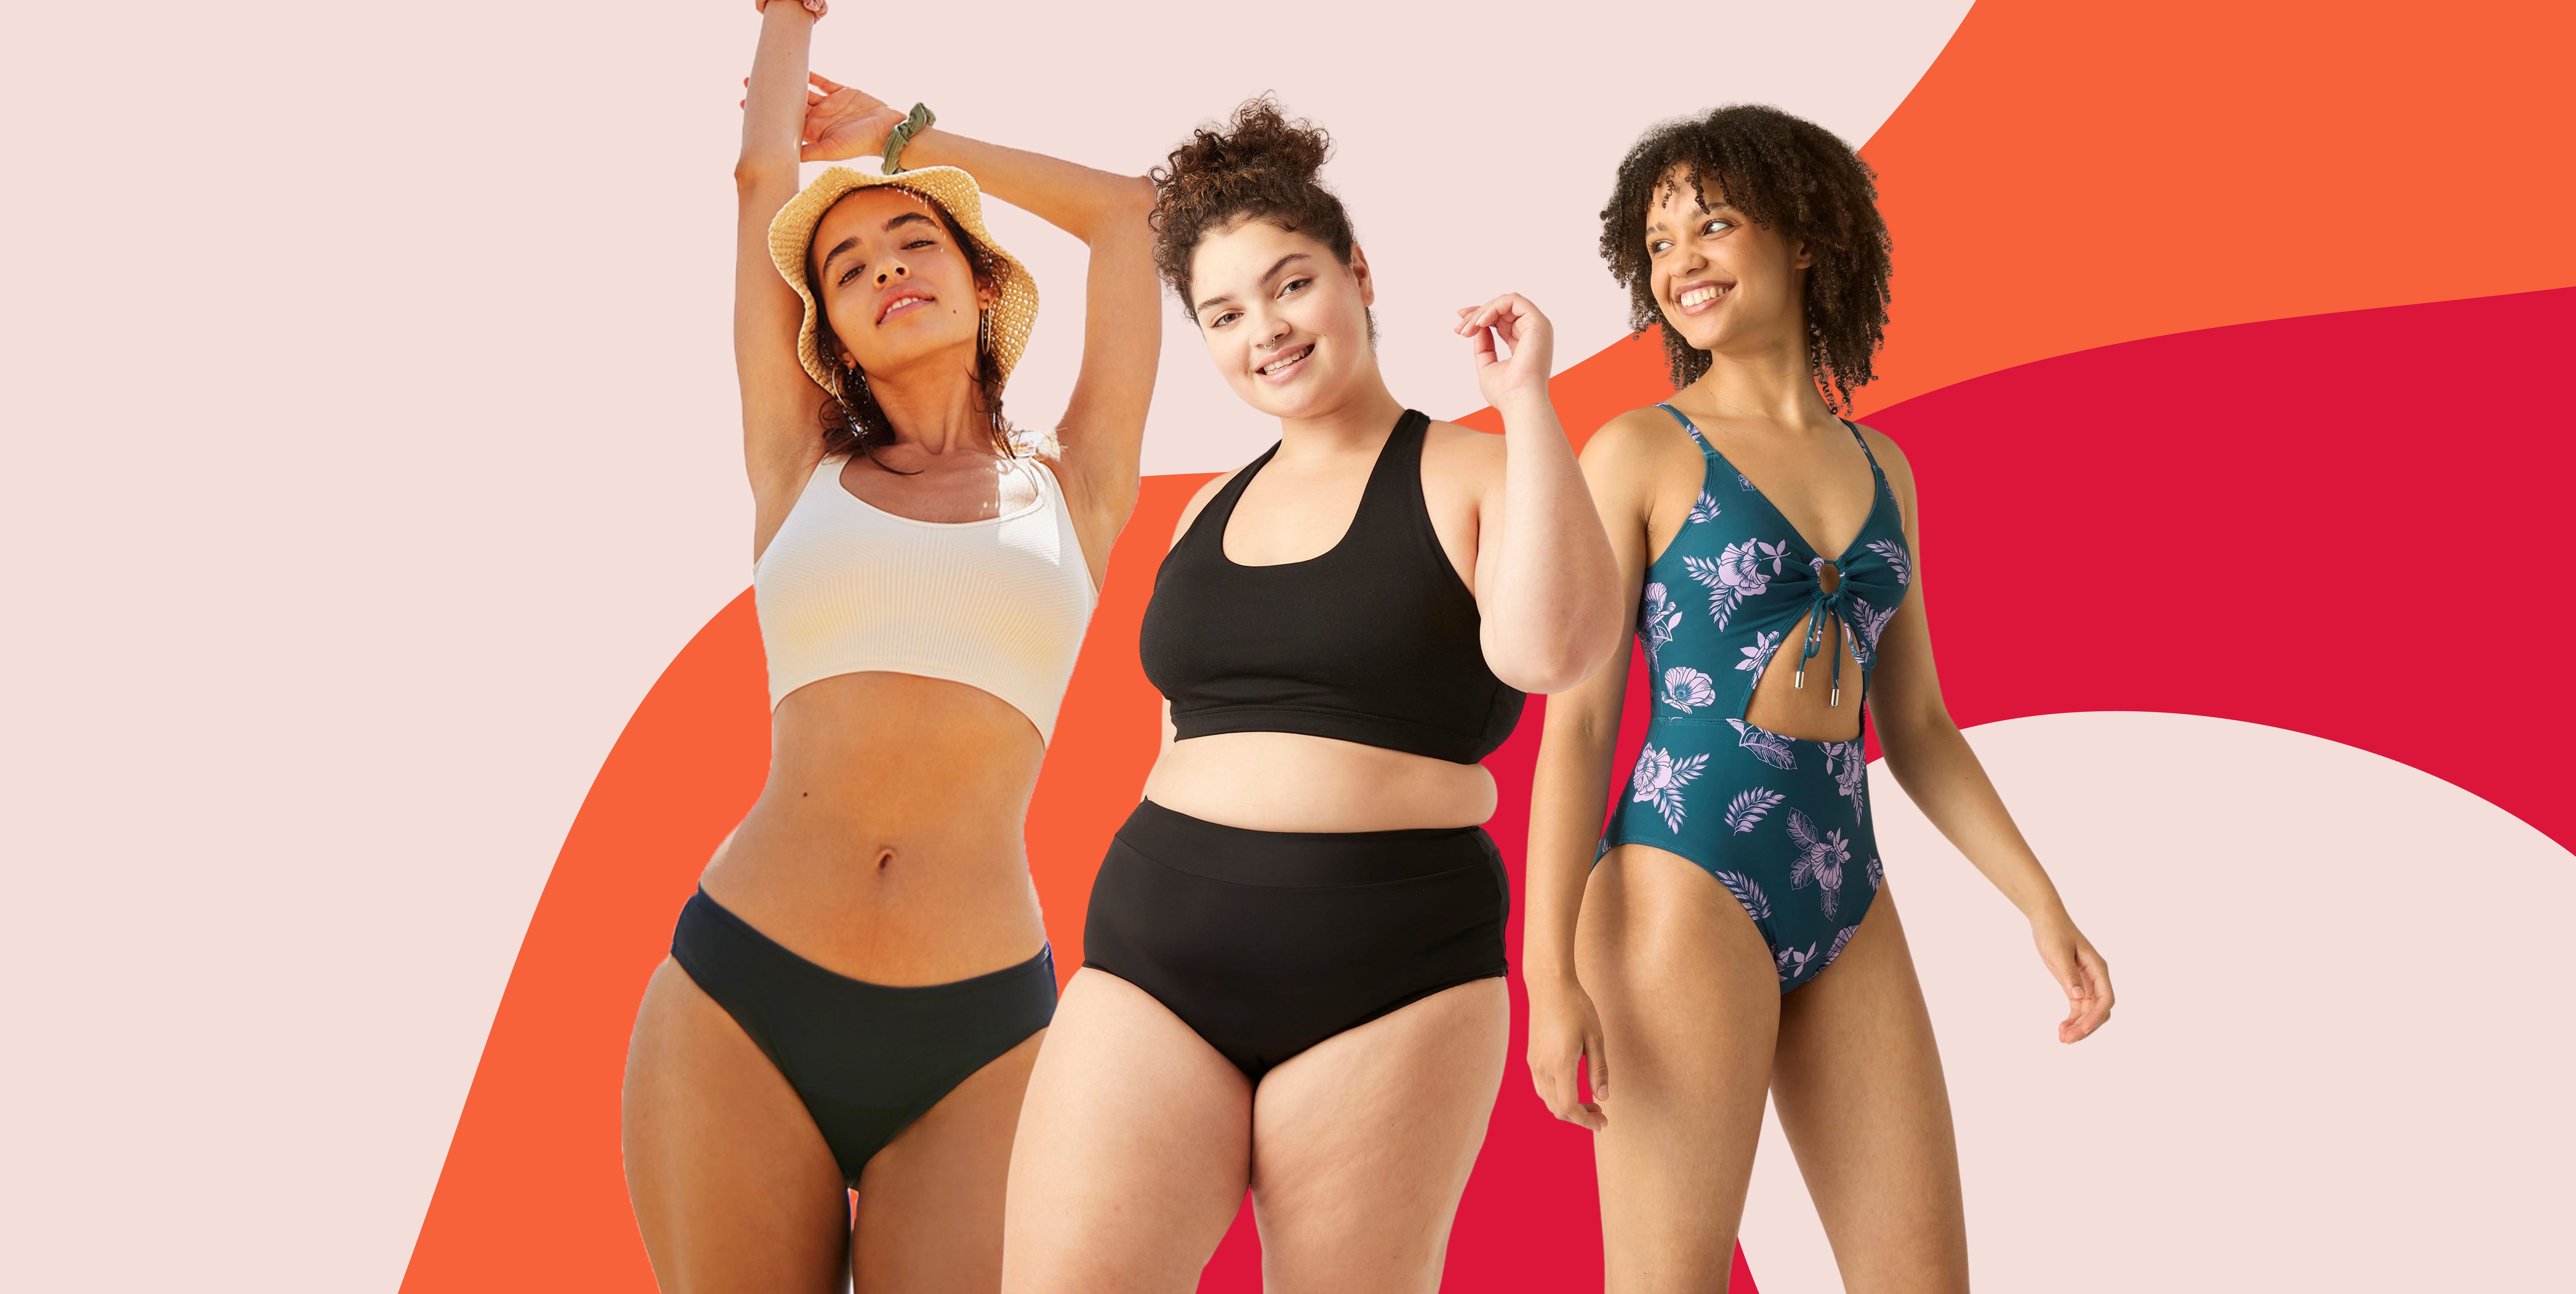 20 best bikinis for big busts that are supportive & stylish